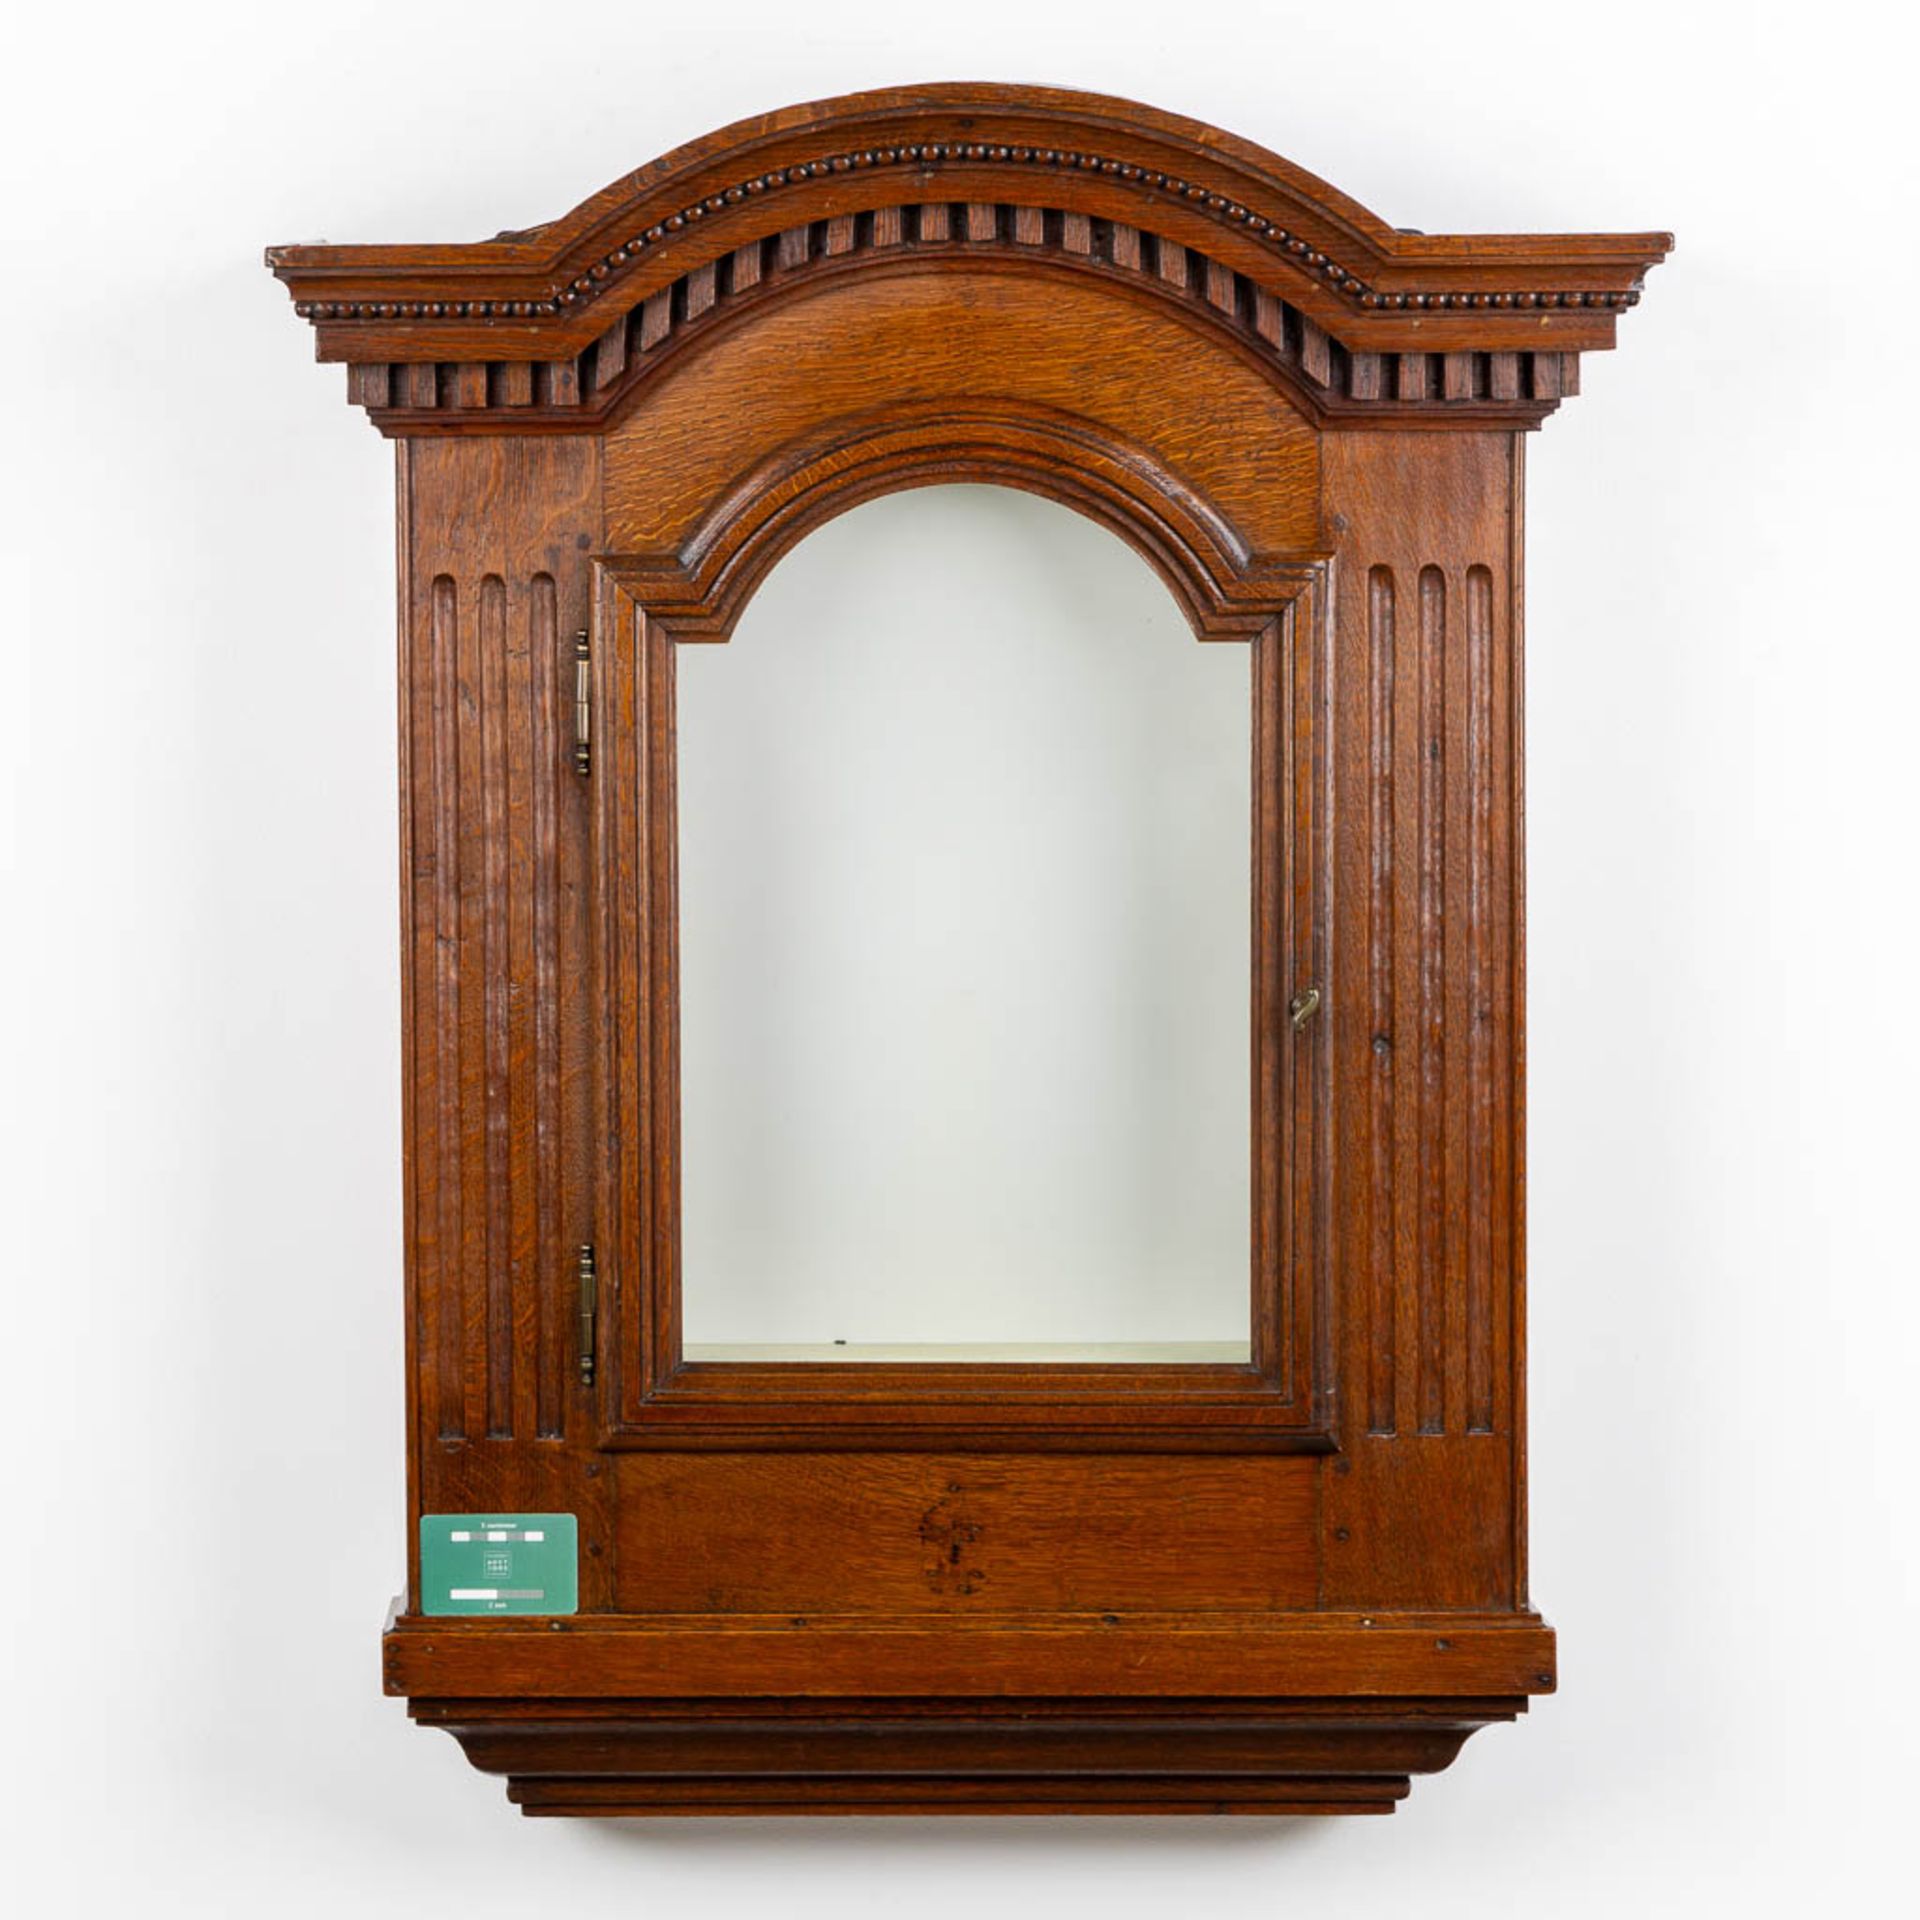 A small wall-mounted display cabinet, Oak, 19th C. (L:23 x W:75 x H:96 cm) - Image 2 of 8